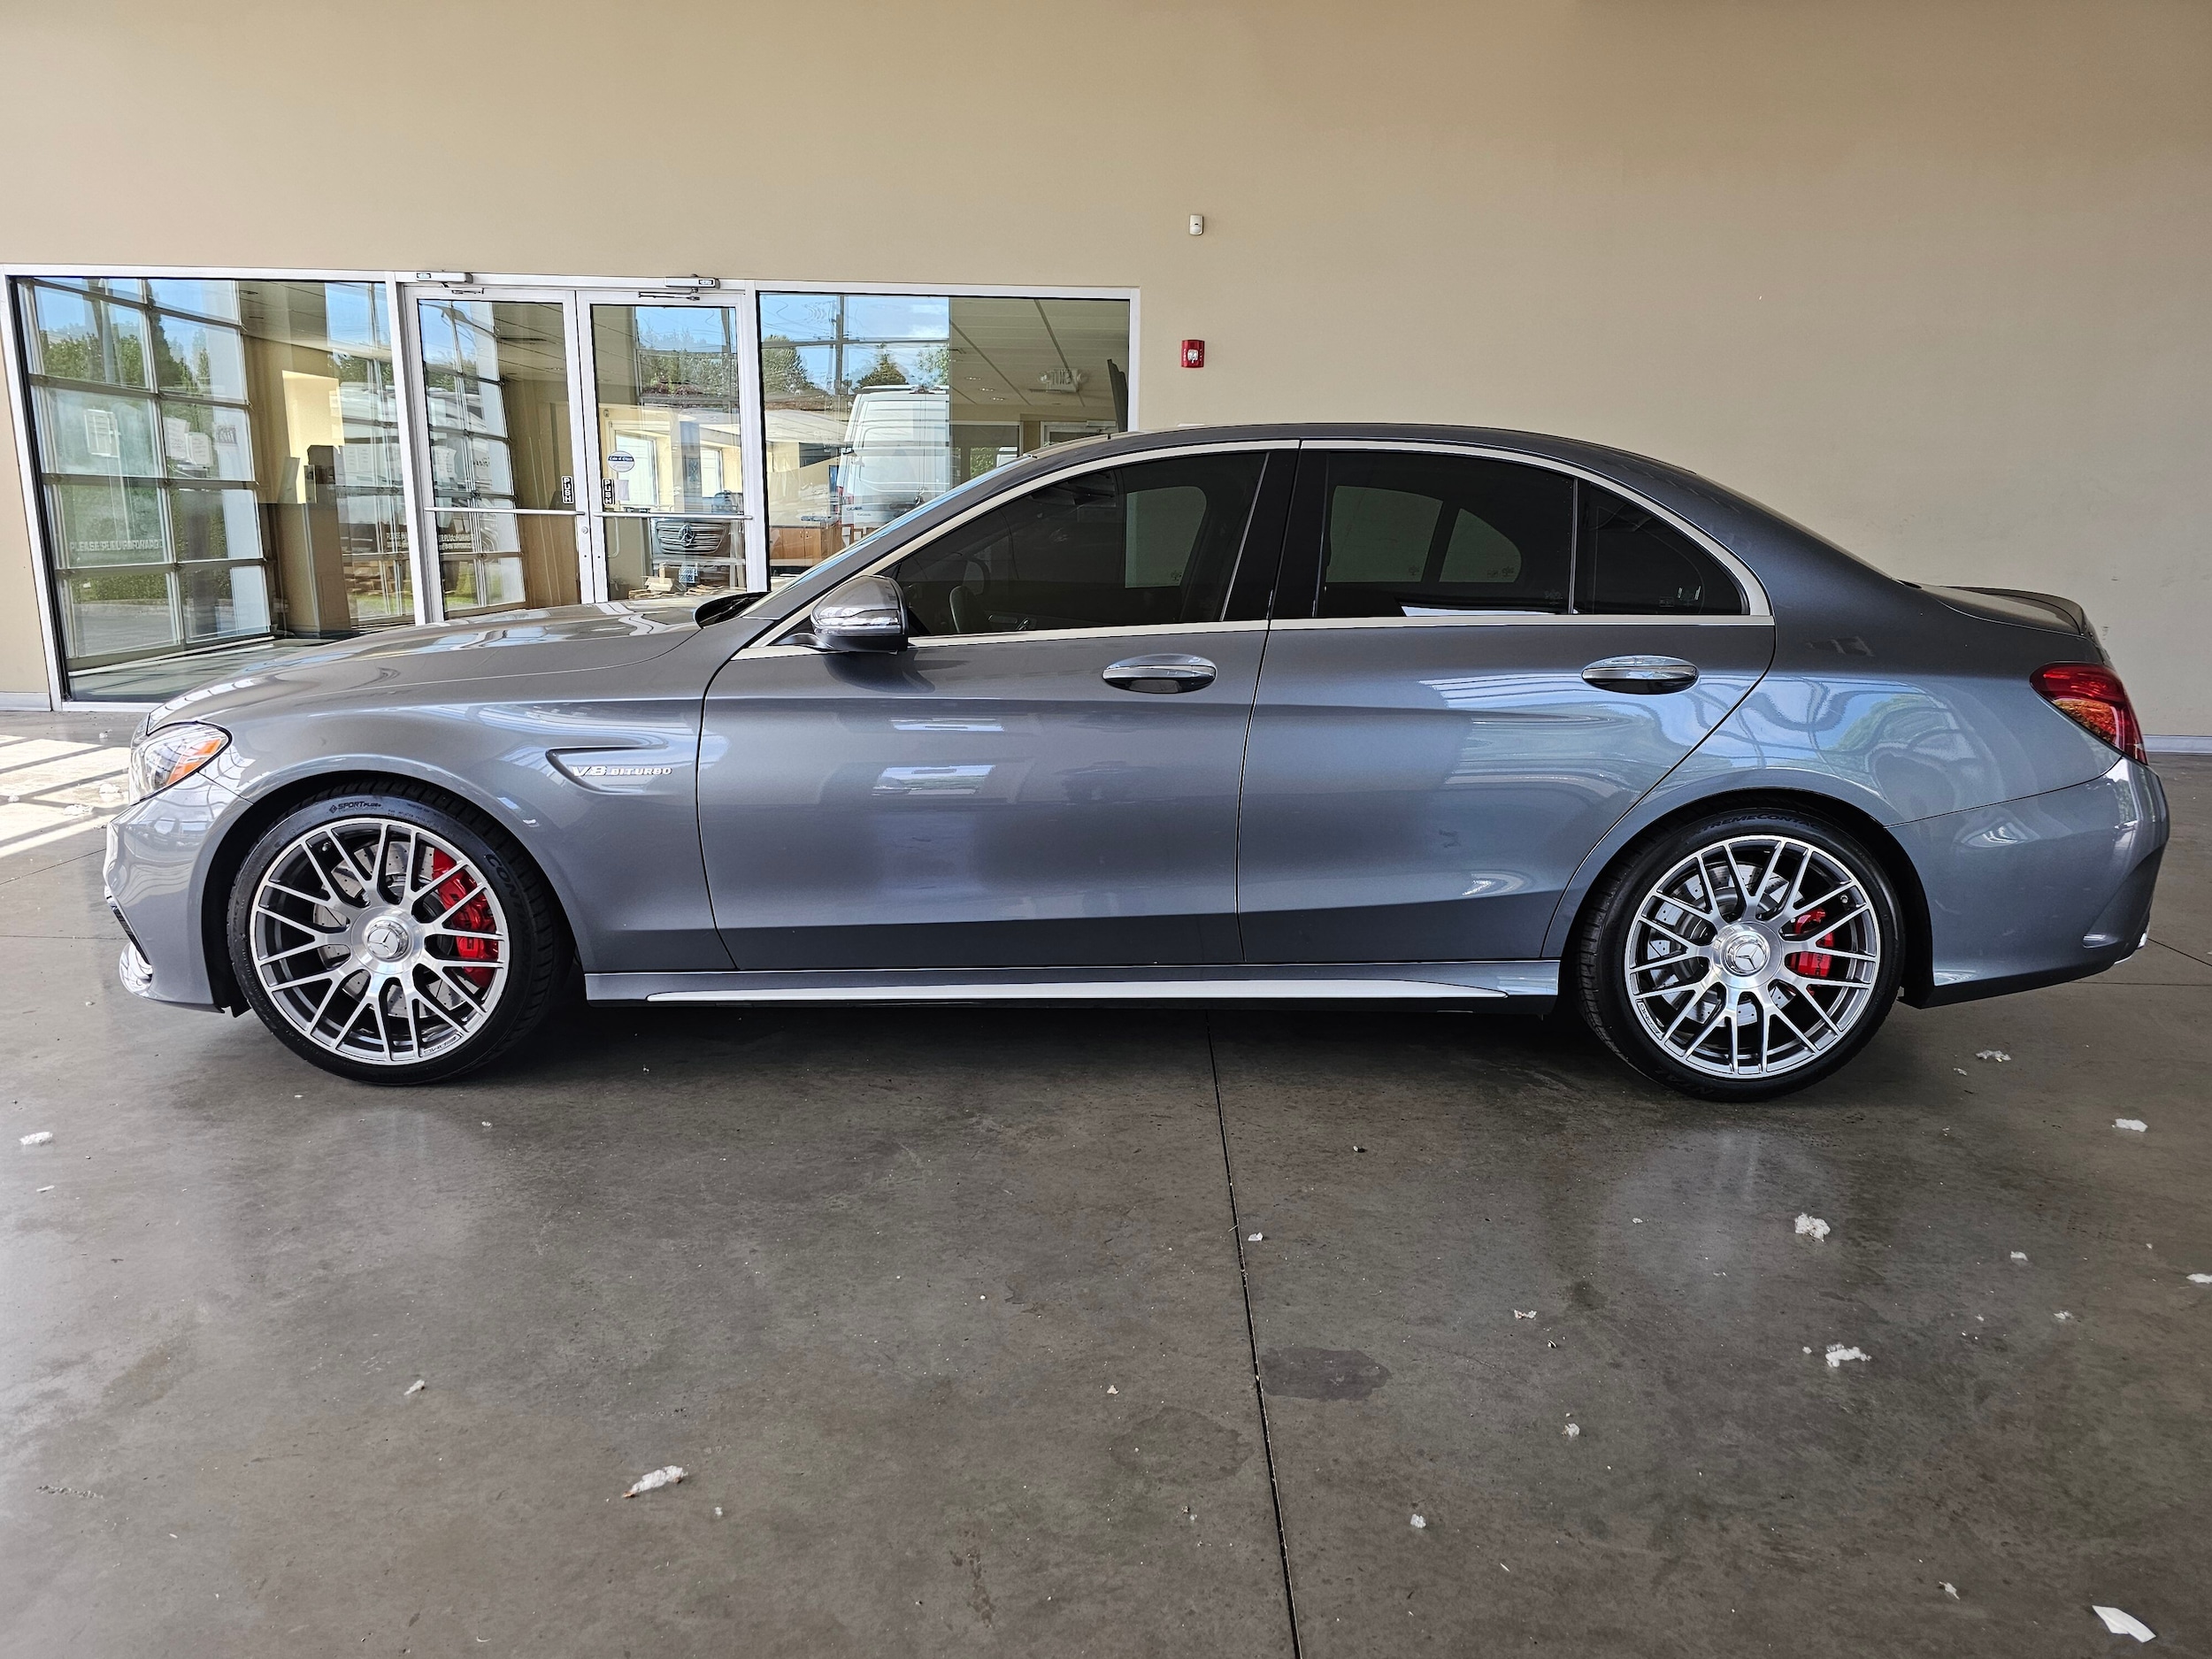 Used 2018 Mercedes-Benz C-Class Sedan AMG C63 S with VIN 55SWF8HB5JU236478 for sale in Fife, WA